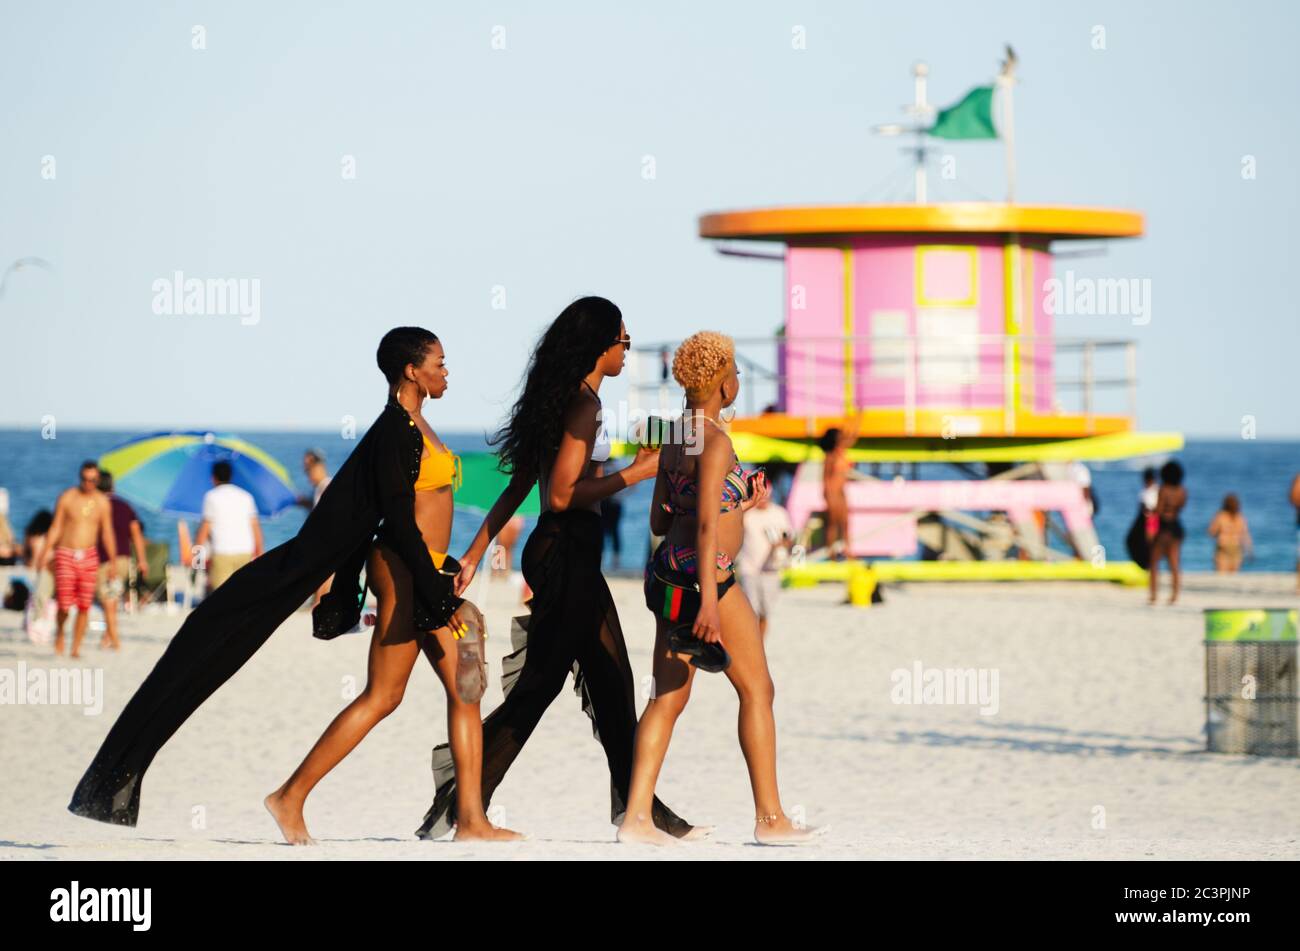 MIAMI - MARCH 16, 2019: A group of young women walk toward a gathering of college students celebrating spring break on South Beach. Stock Photo